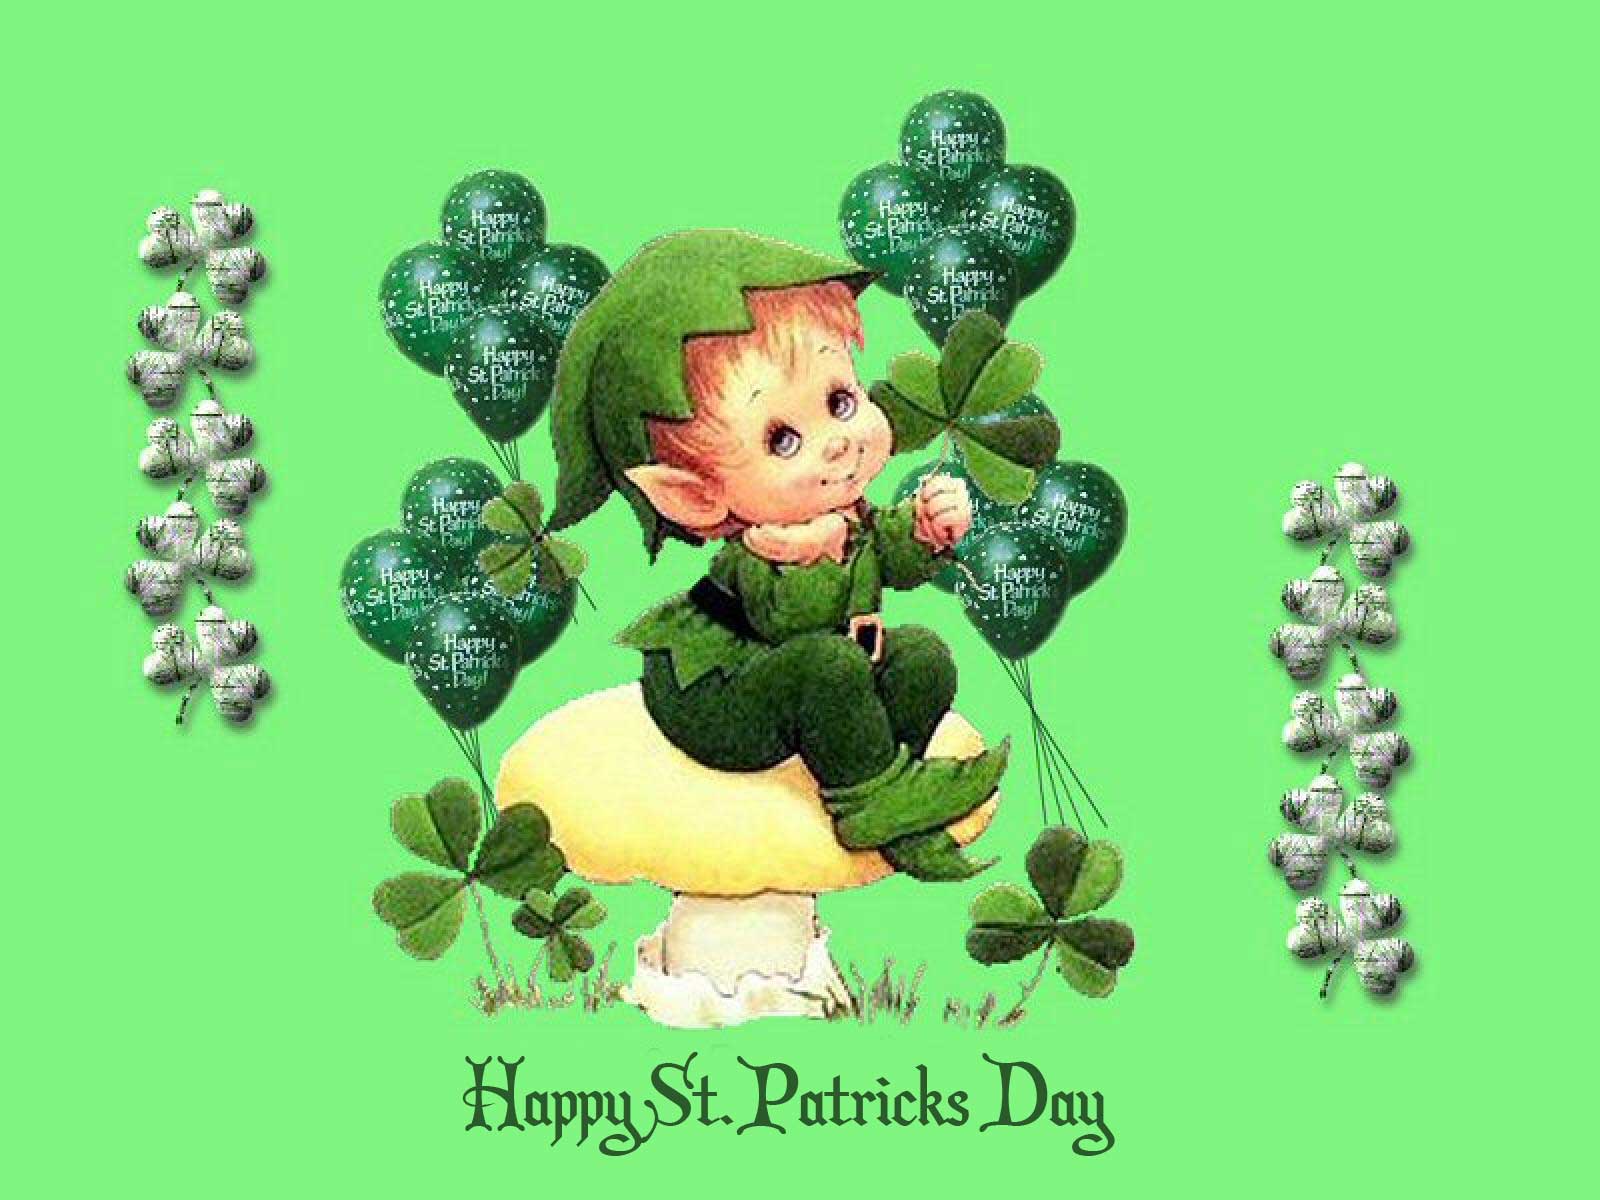 St Patricks Day Wallpaper Image And Article Update